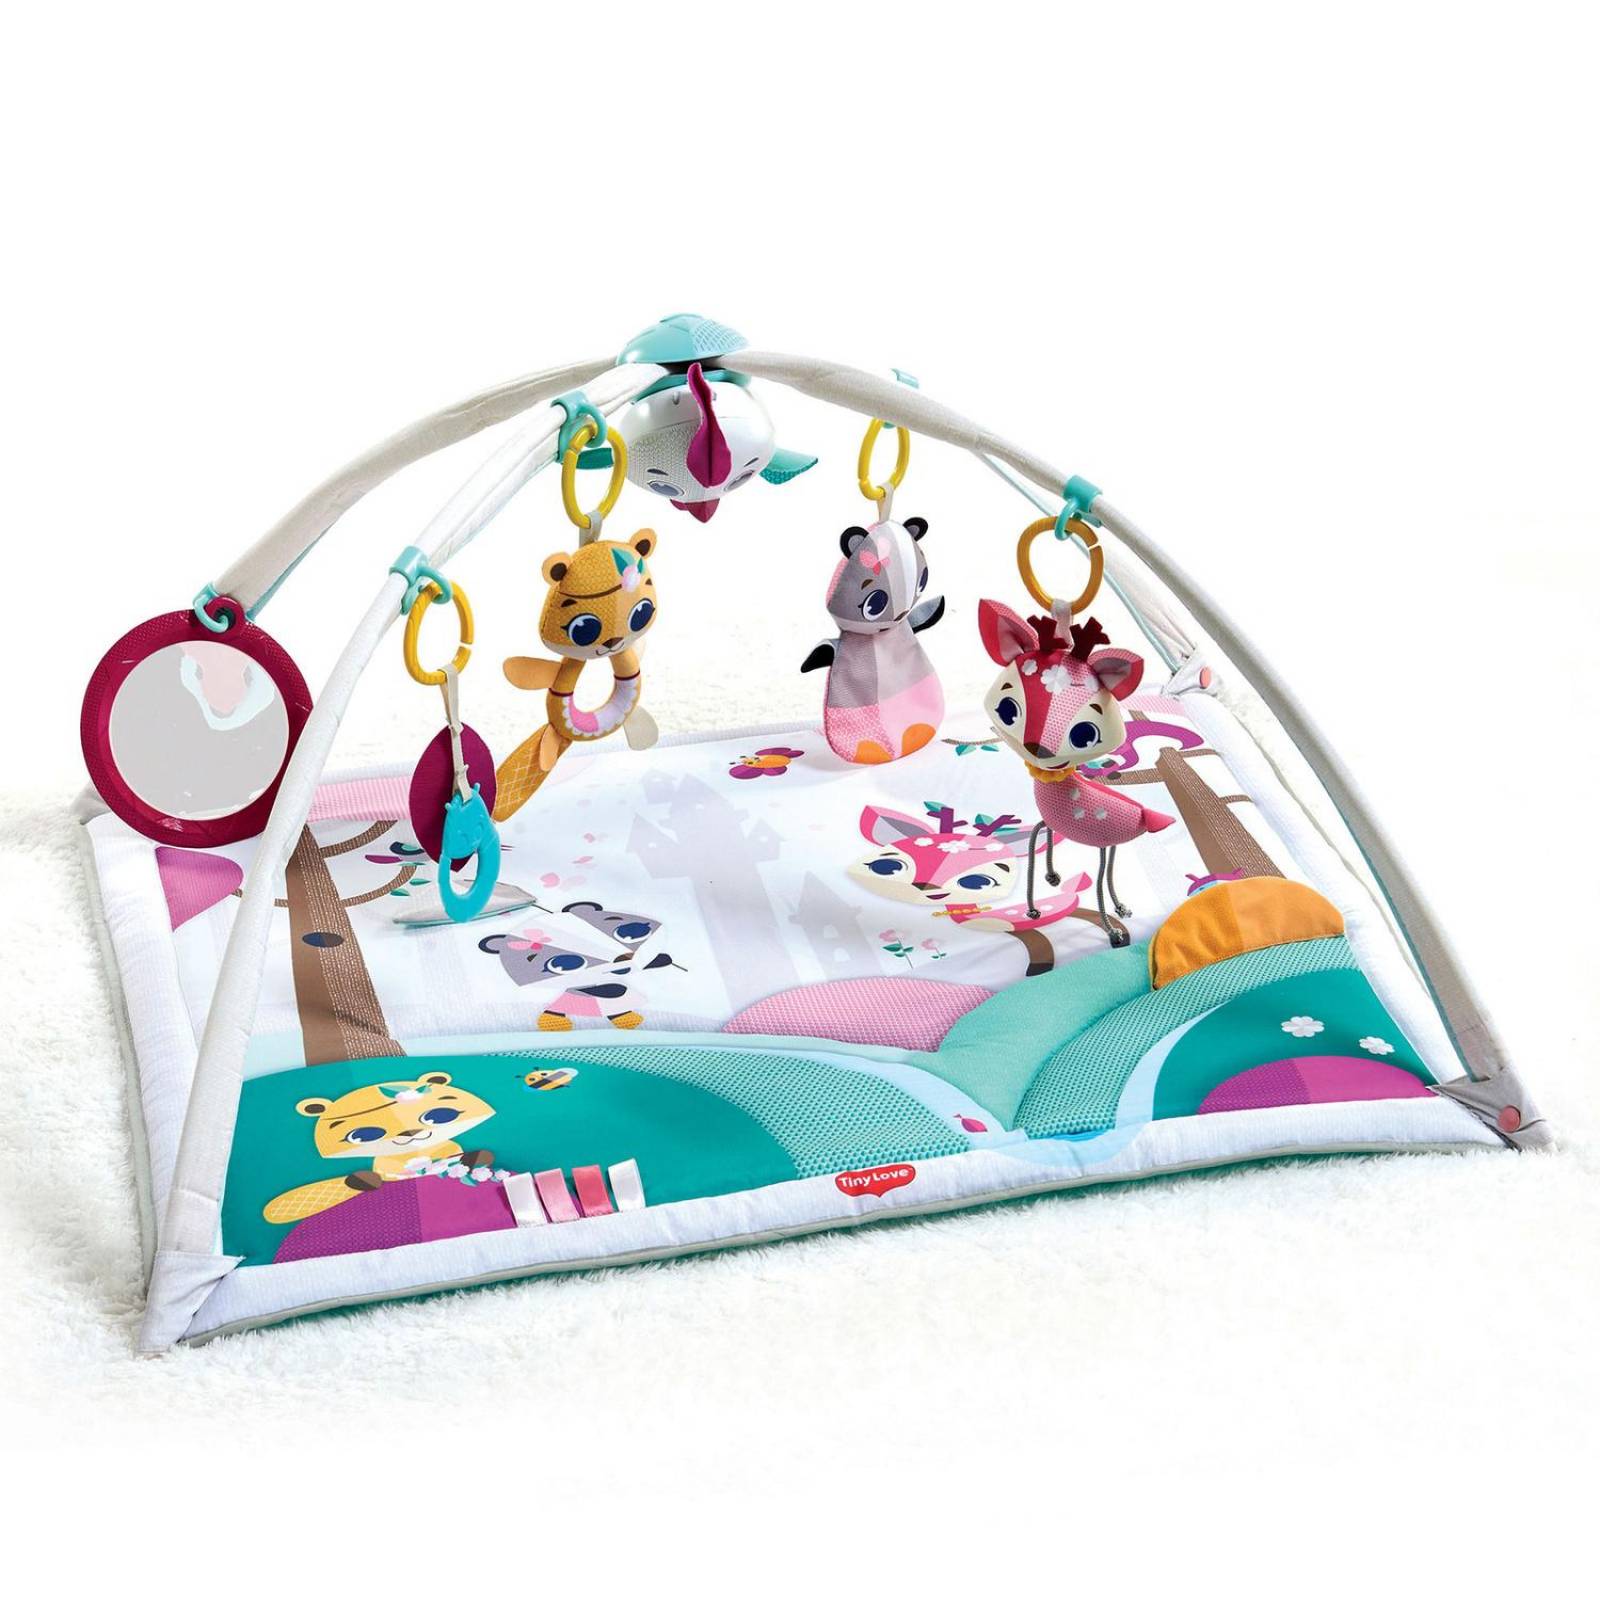 Tiny Princess Tales Gymini Deluxe n/a Multicolor